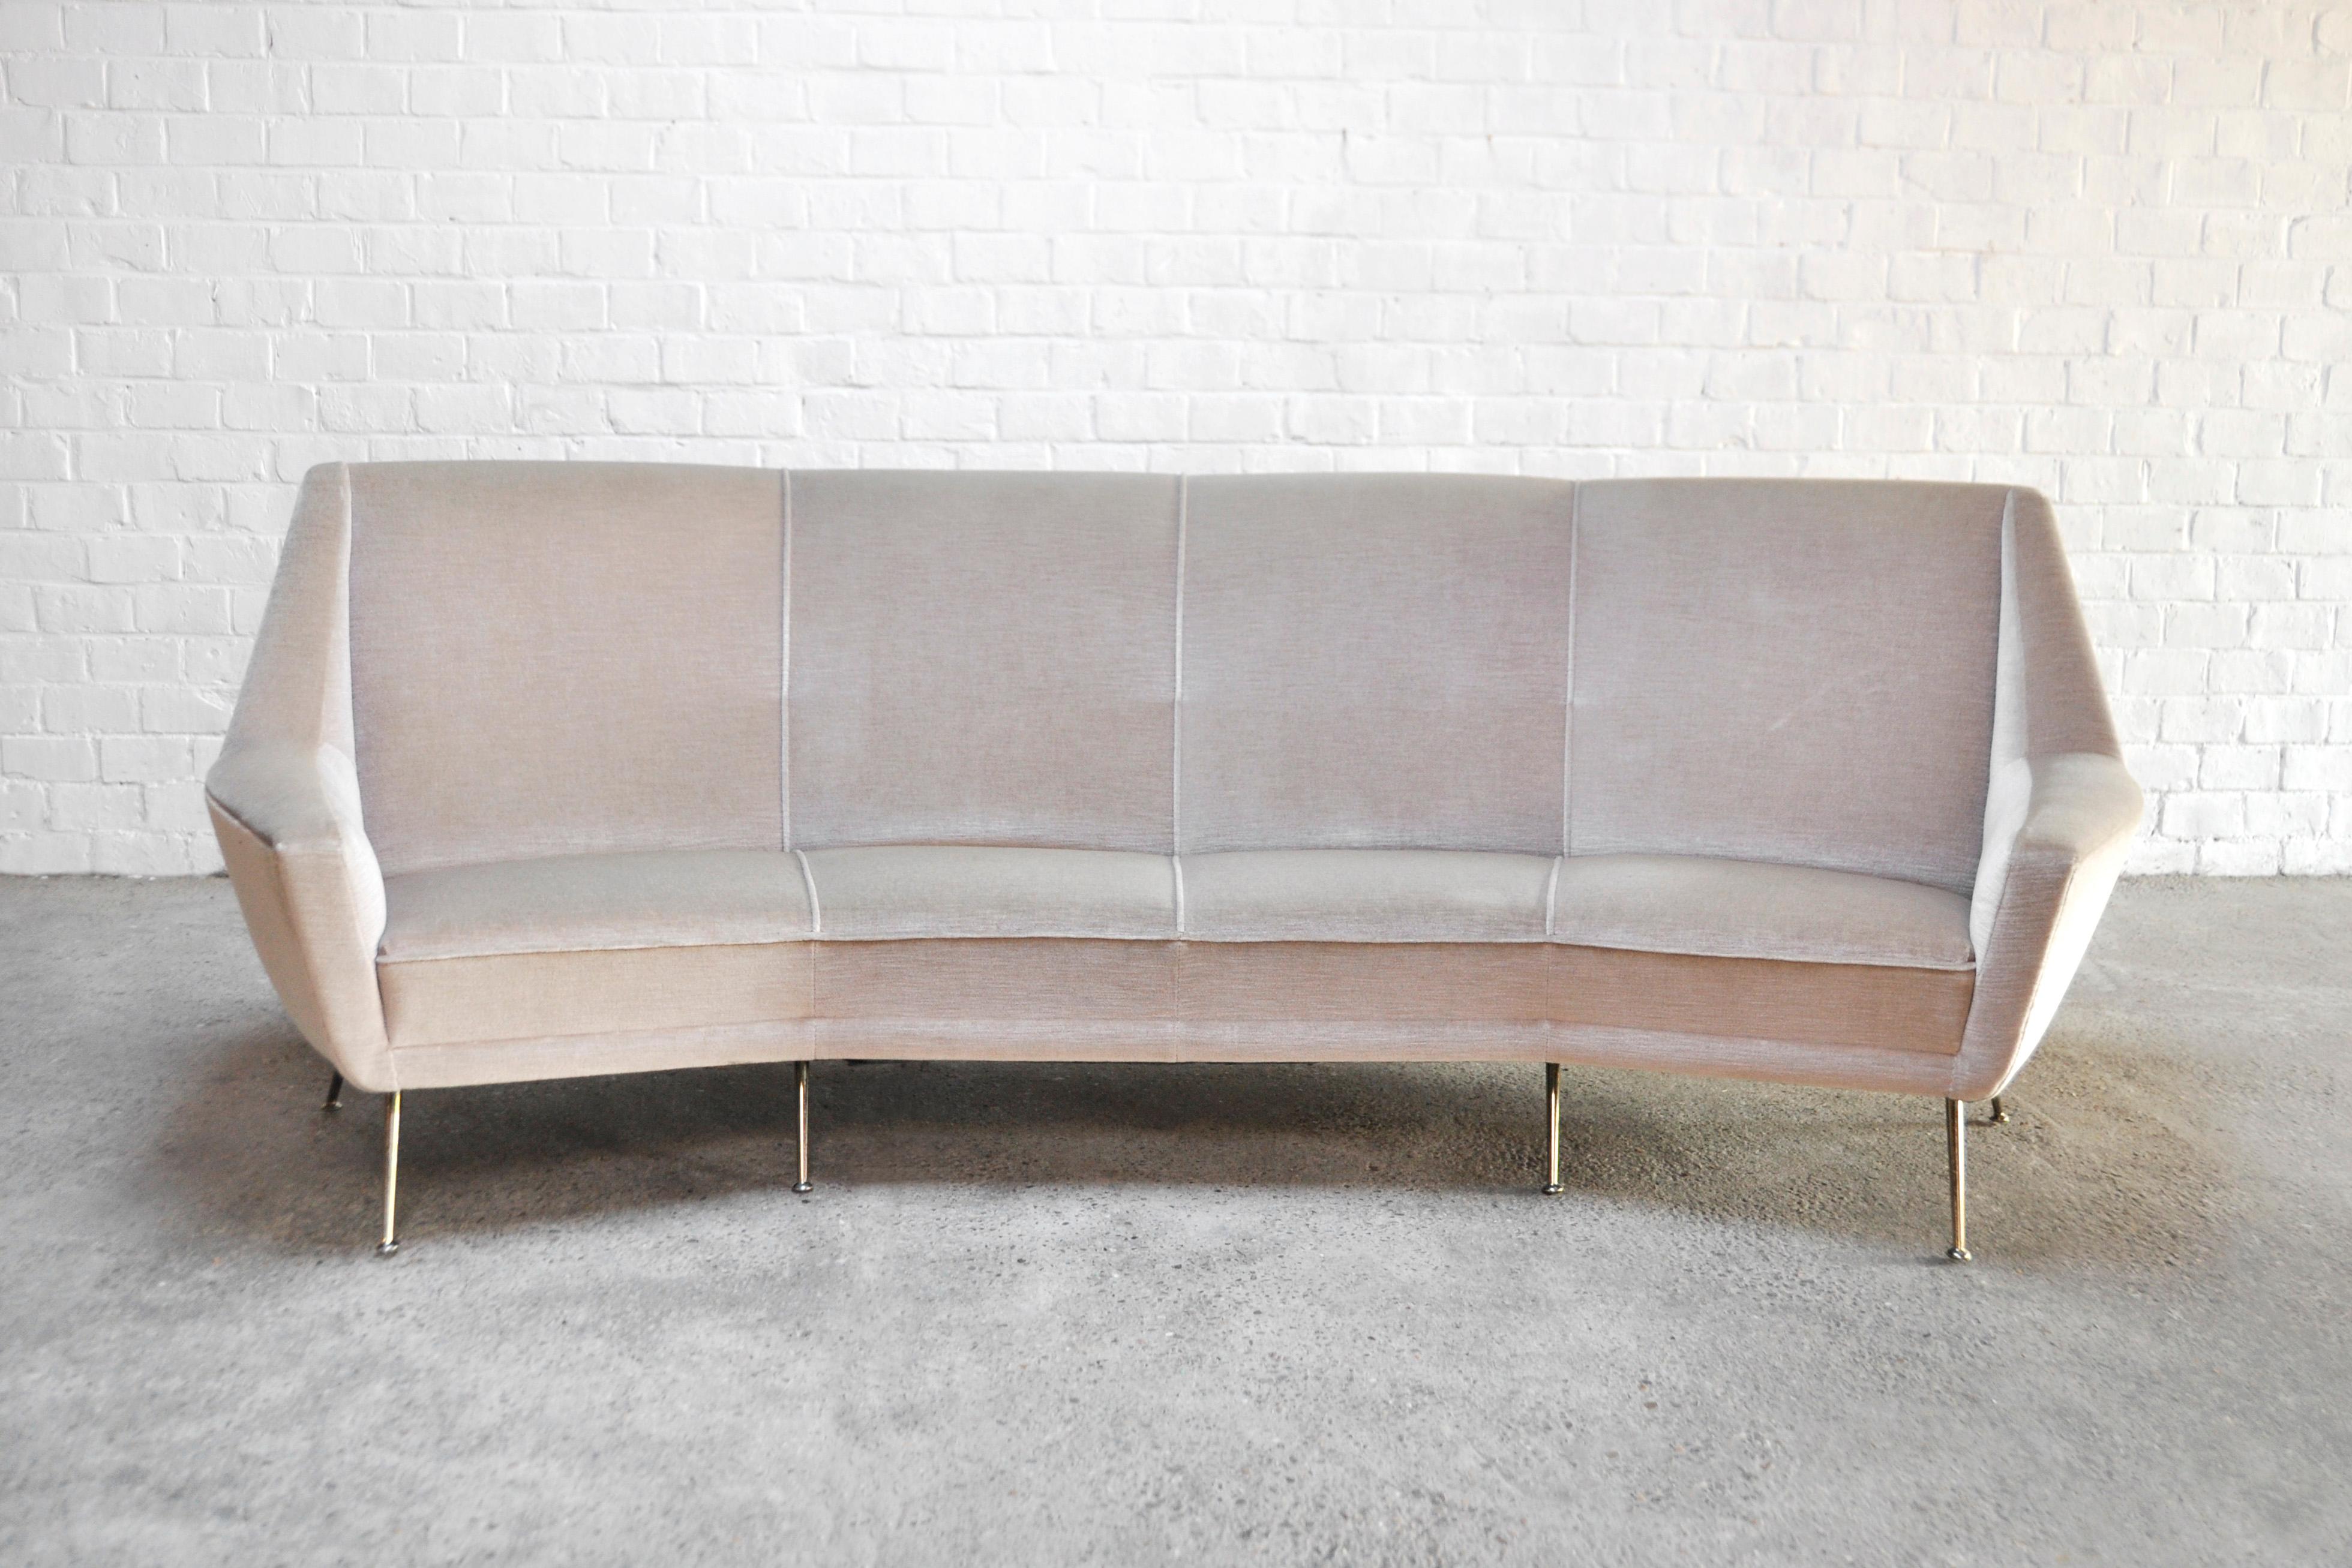 Large Italian curved four-seater sofa composed of six splayed polished legs, large wing shaped arms and a curved high back, in the style of Ico Parisi. Upholstered in beige fabric.

In near perfect condition, almost no signs of pre-use.